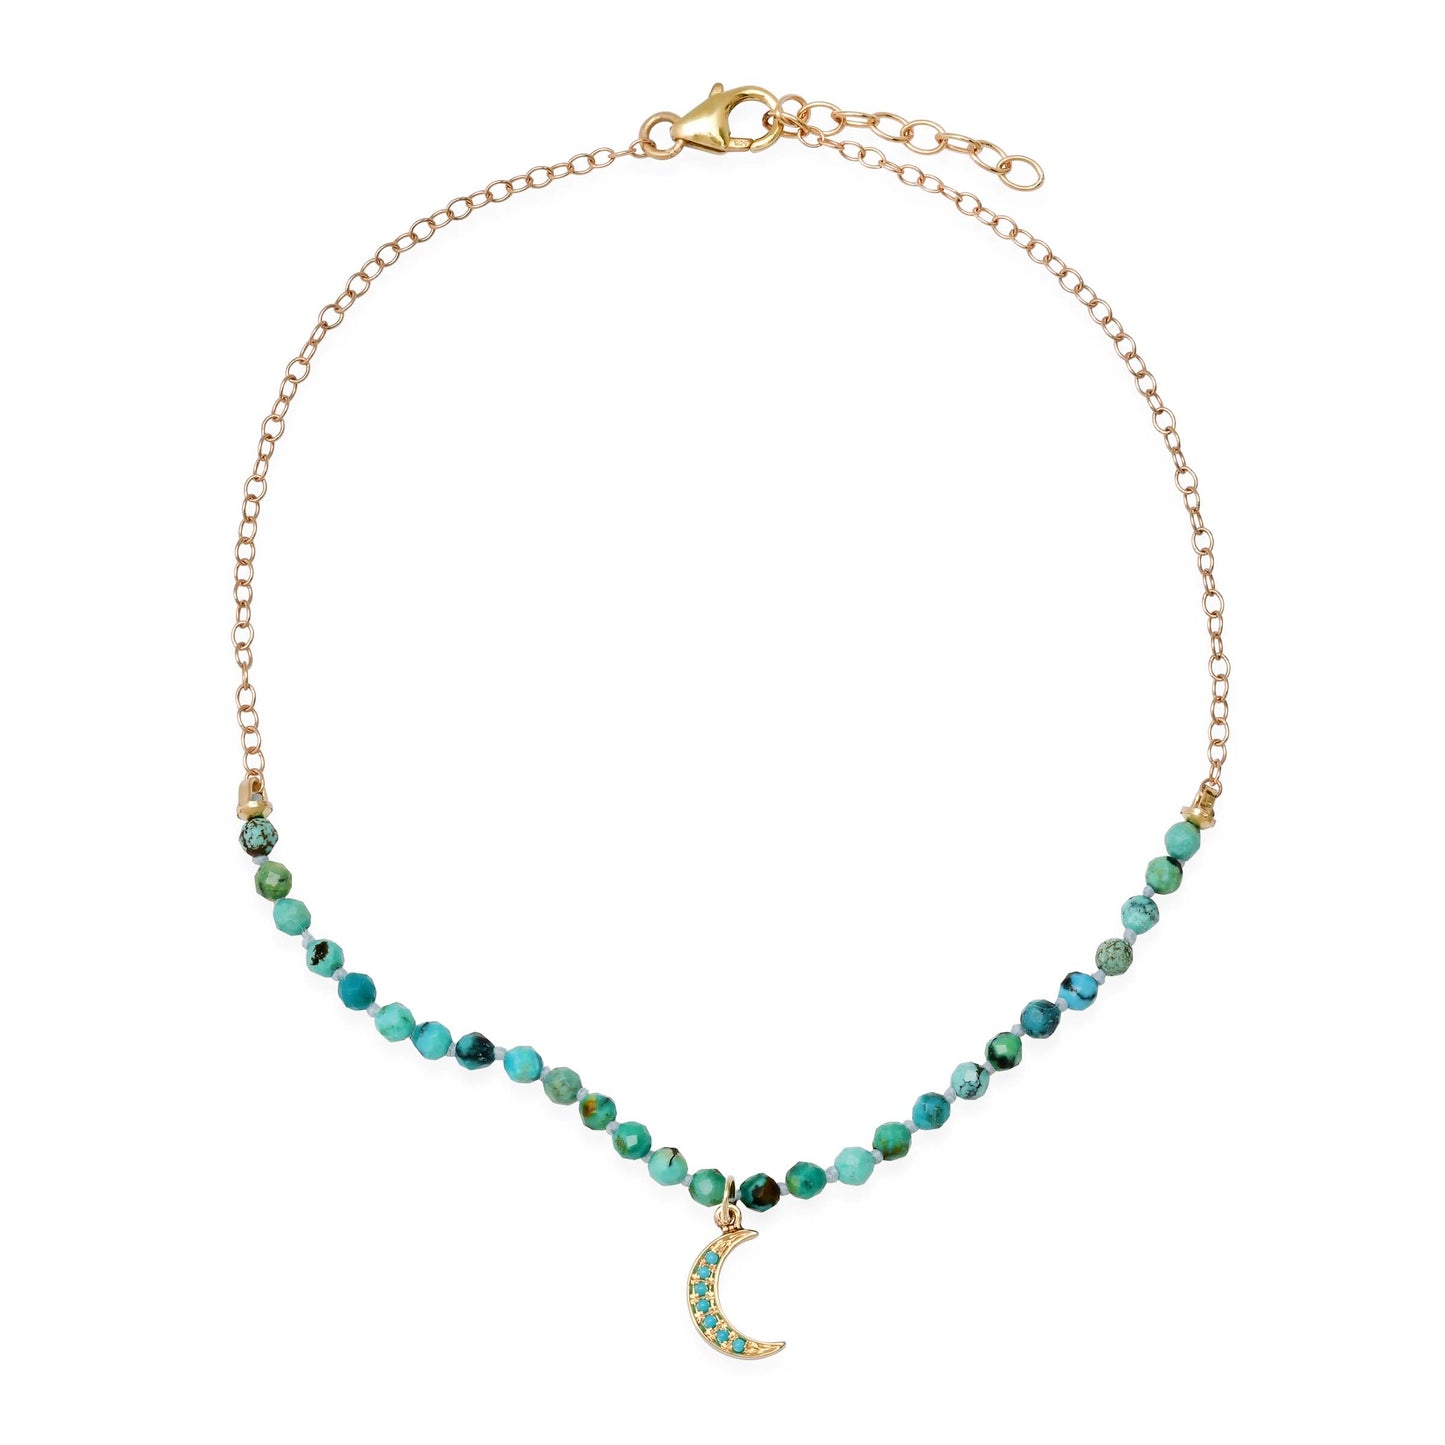 Peek-A-Boo Turquoise Anklet with Mini Crescent Charm